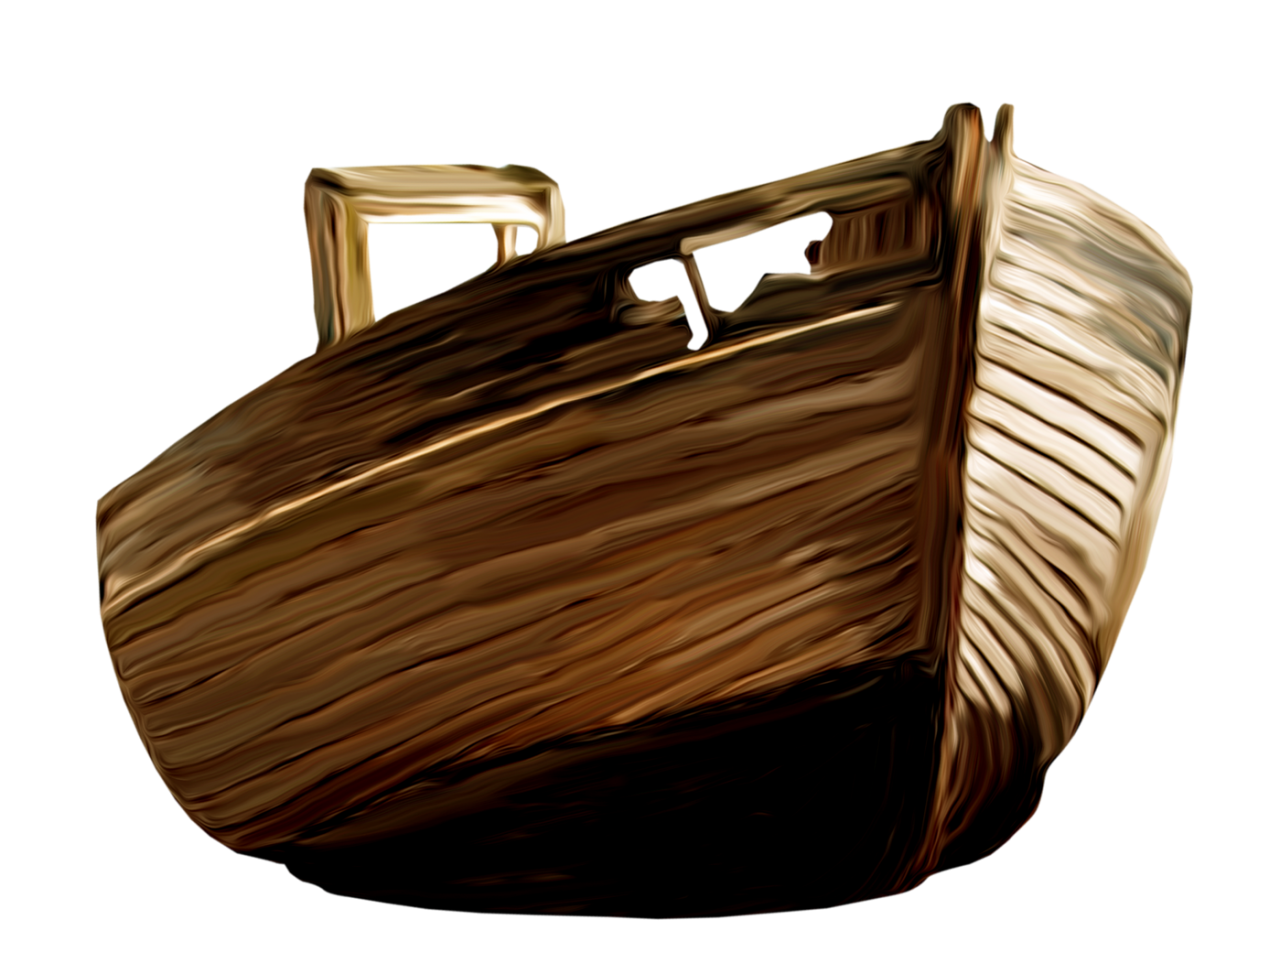 Wooden Boat PNG Image - PurePNG | Free transparent CC0 PNG Image Library